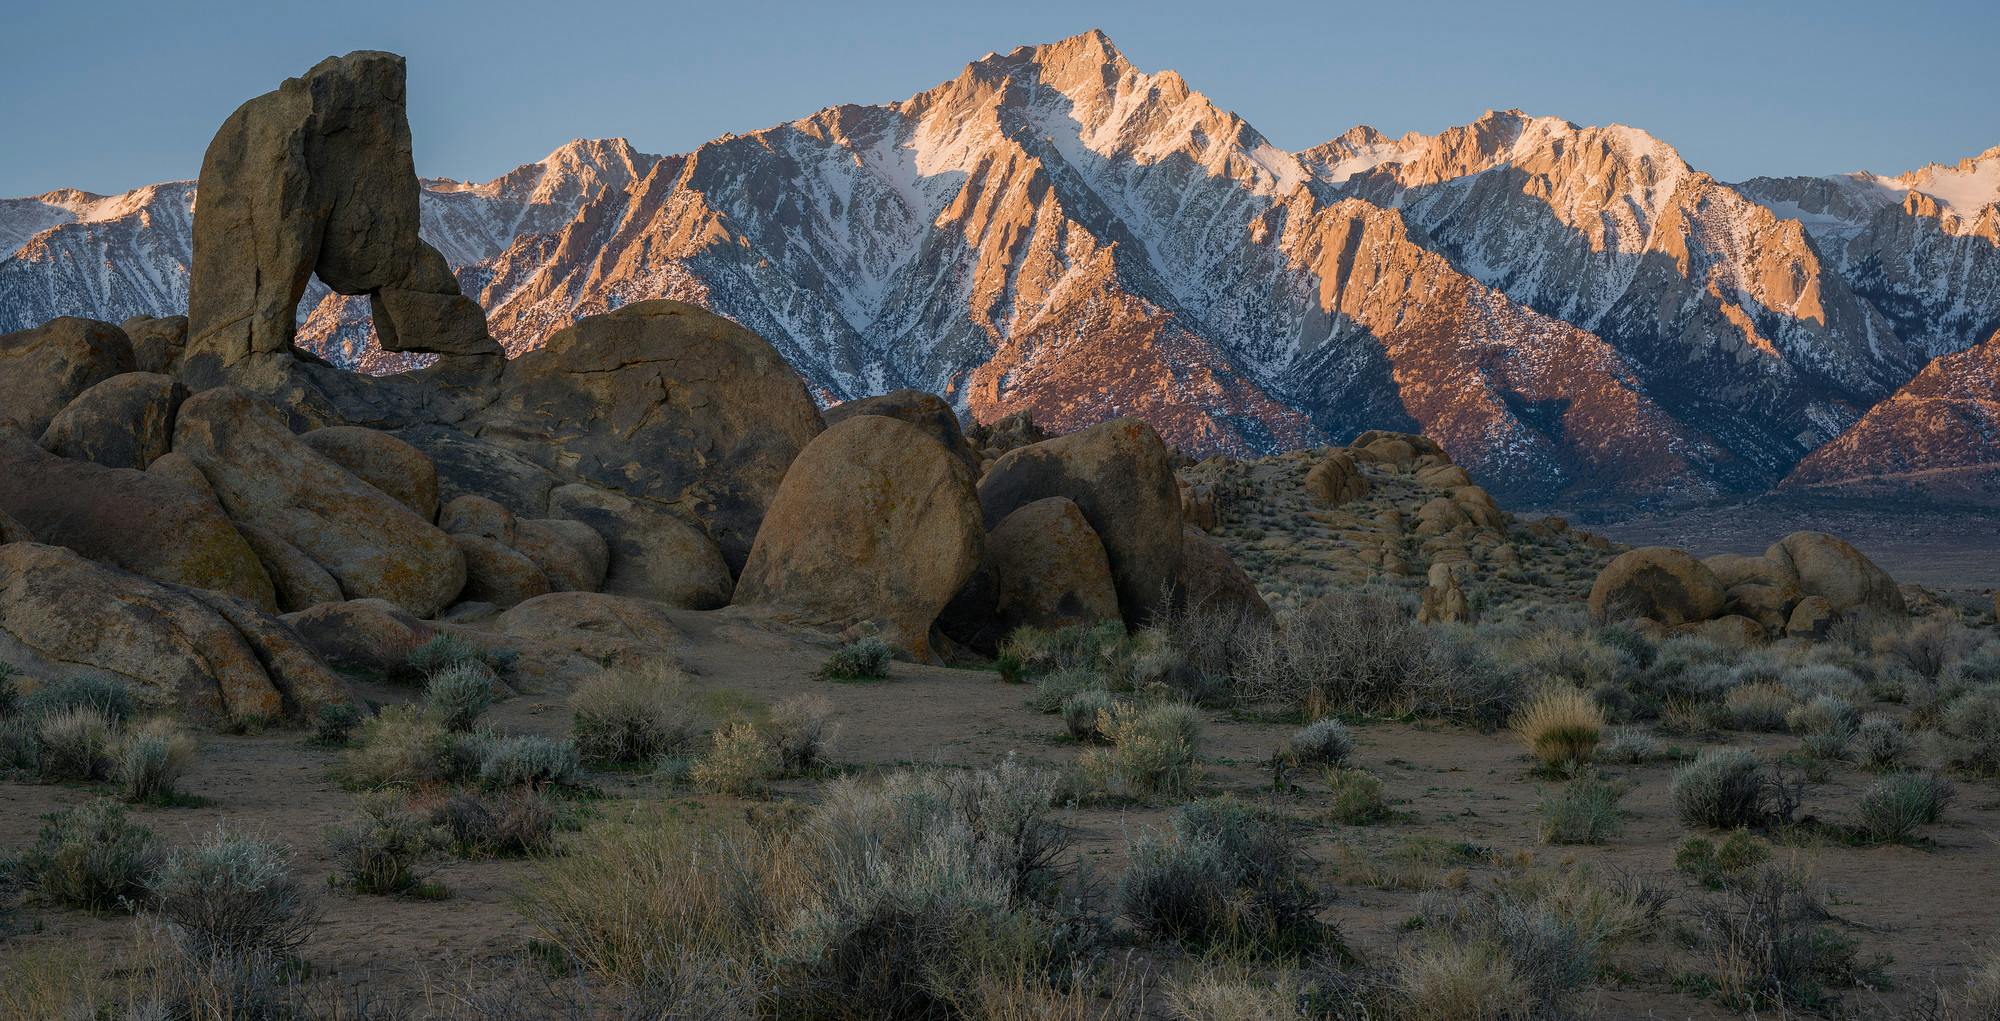 Morning in the Alabama Hills